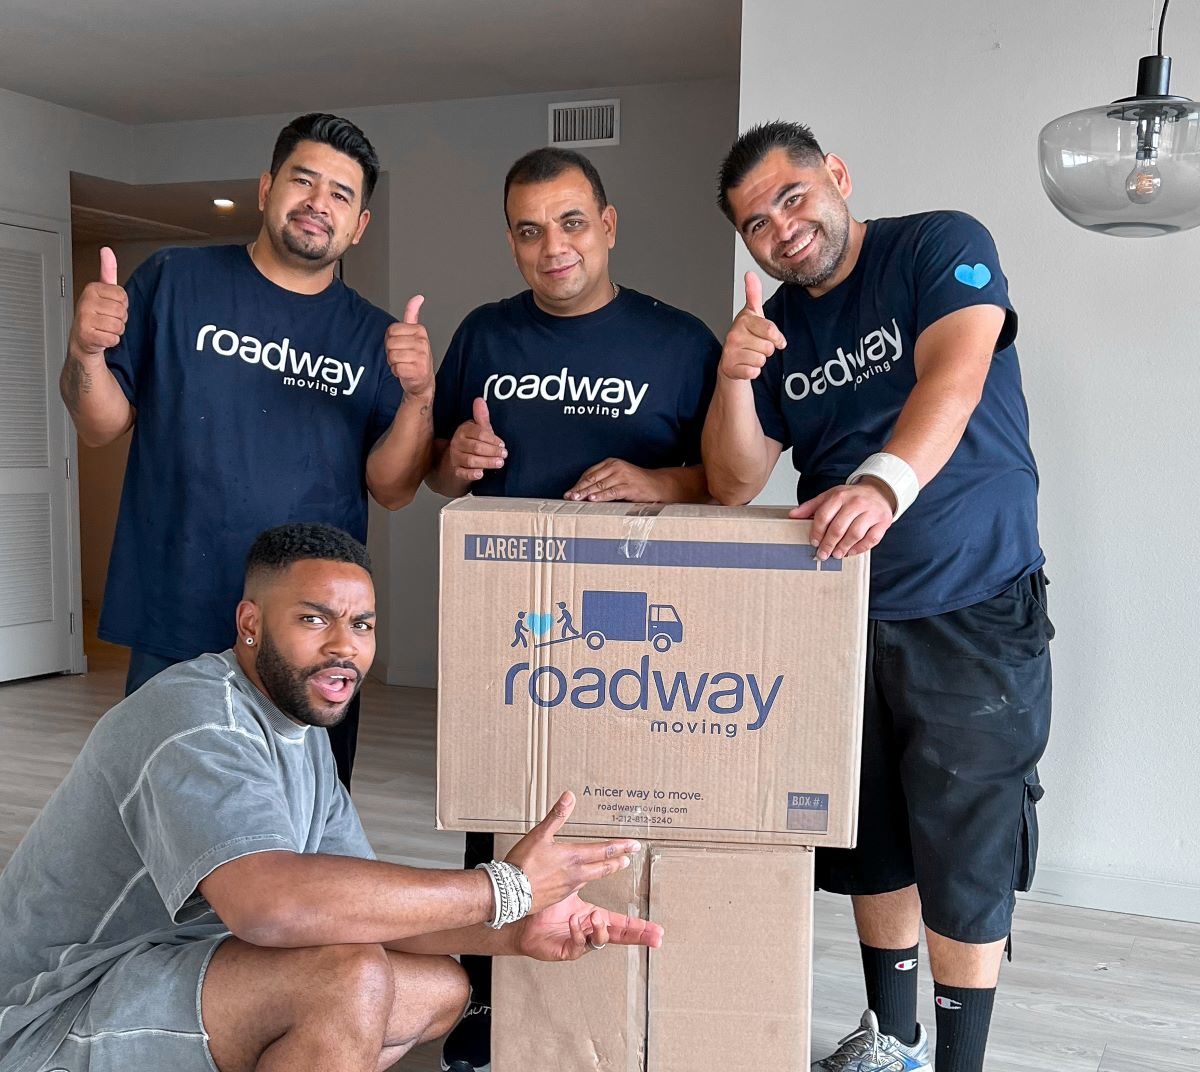 Roadway movers behind a cardboard box, with one of our customers posing in the front.